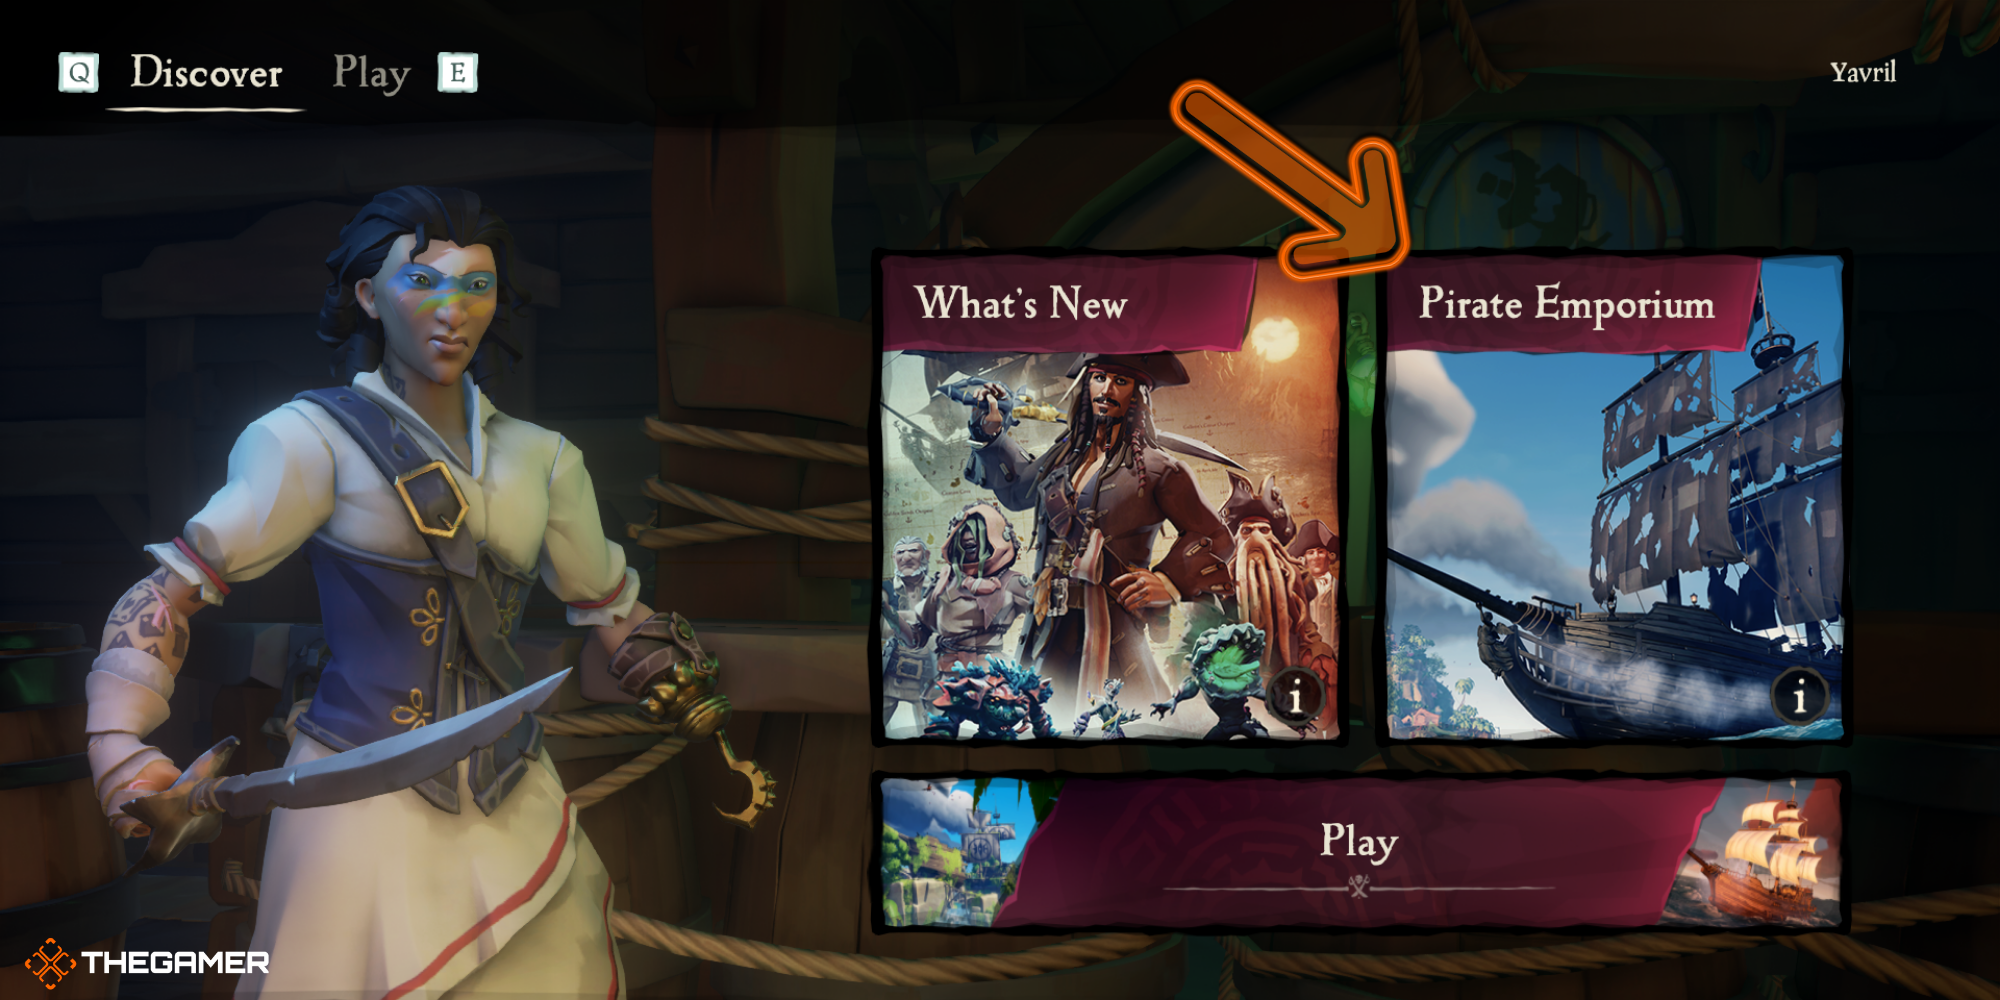 Sea of Thieves - Main Menu with arrow directing the viewer to the Pirate Emporium